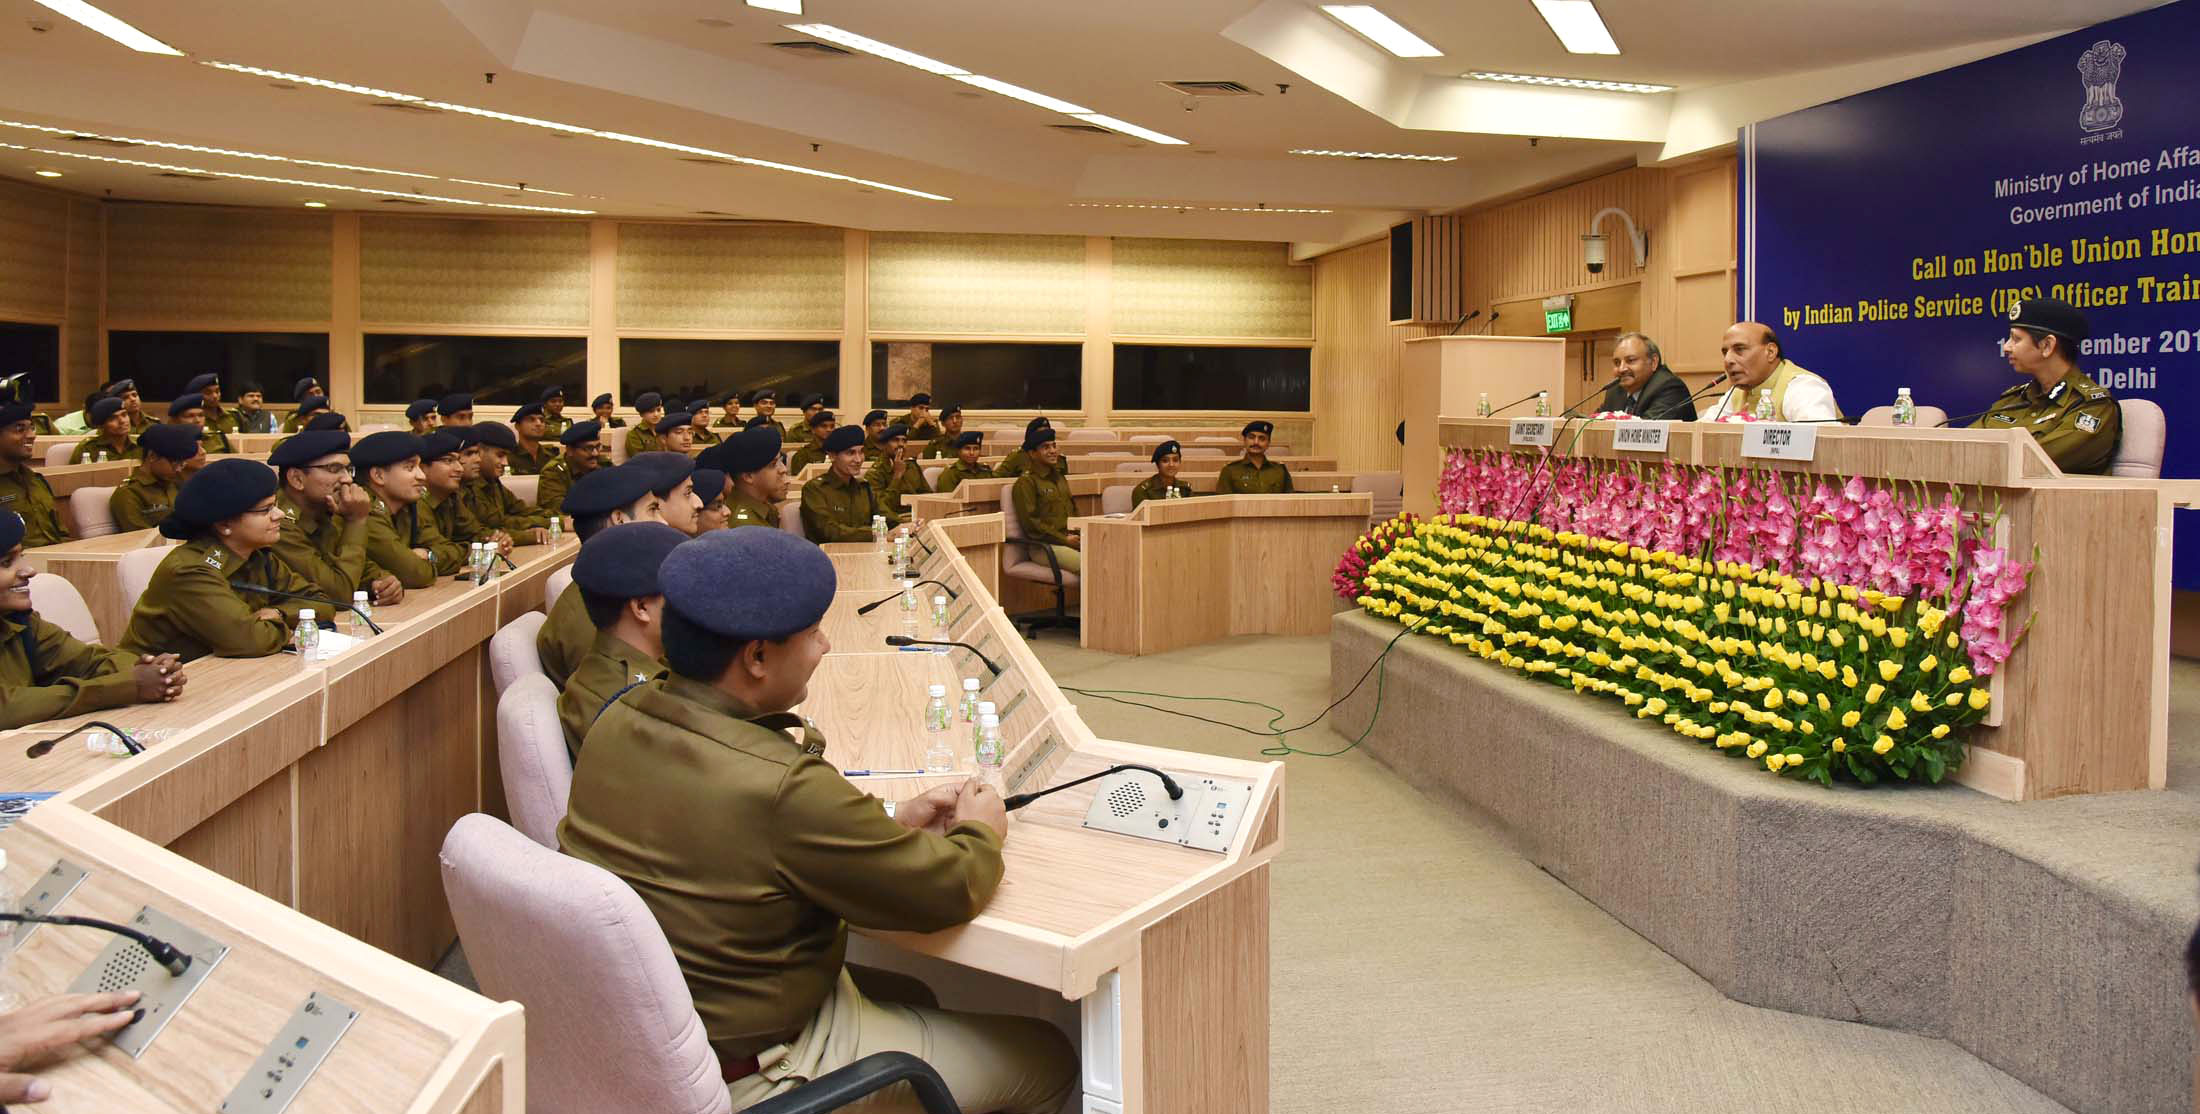 The Union Home Minister, Shri Rajnath Singh interacting with the Indian Police Service (IPS) Officer Trainees of 68 RR (2015 batch), in New Delhi on November 18, 2016.